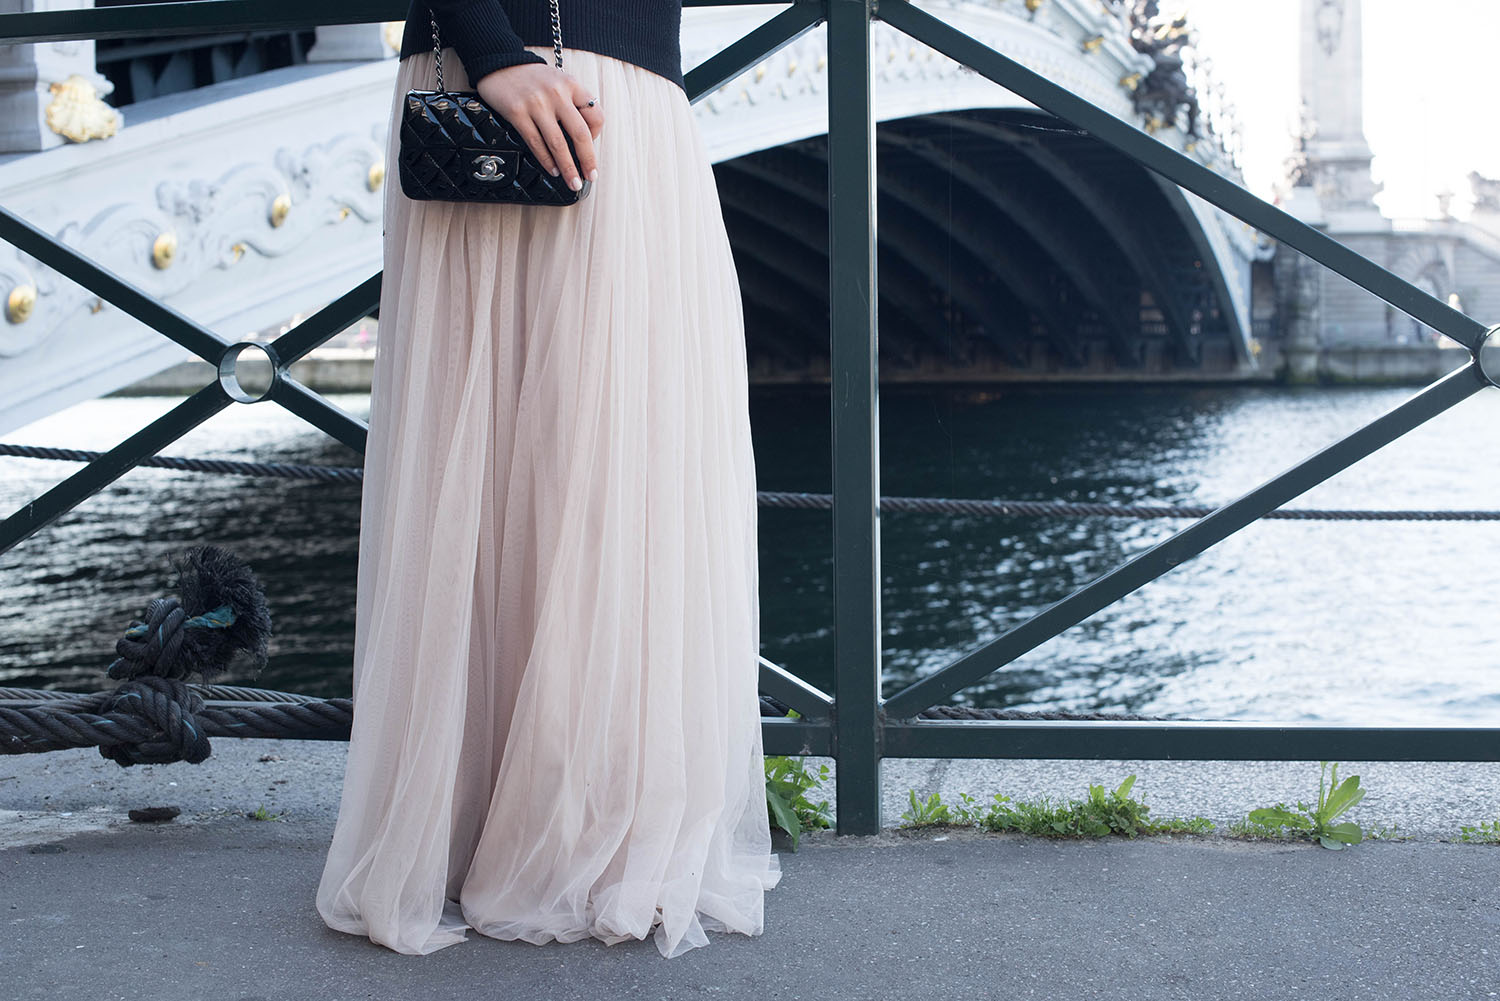 Outfit details on Canadian fashion blogger Cee Fardoe of Coco & Vera, including a Chanel black patent handbag and Needle & Thread dress